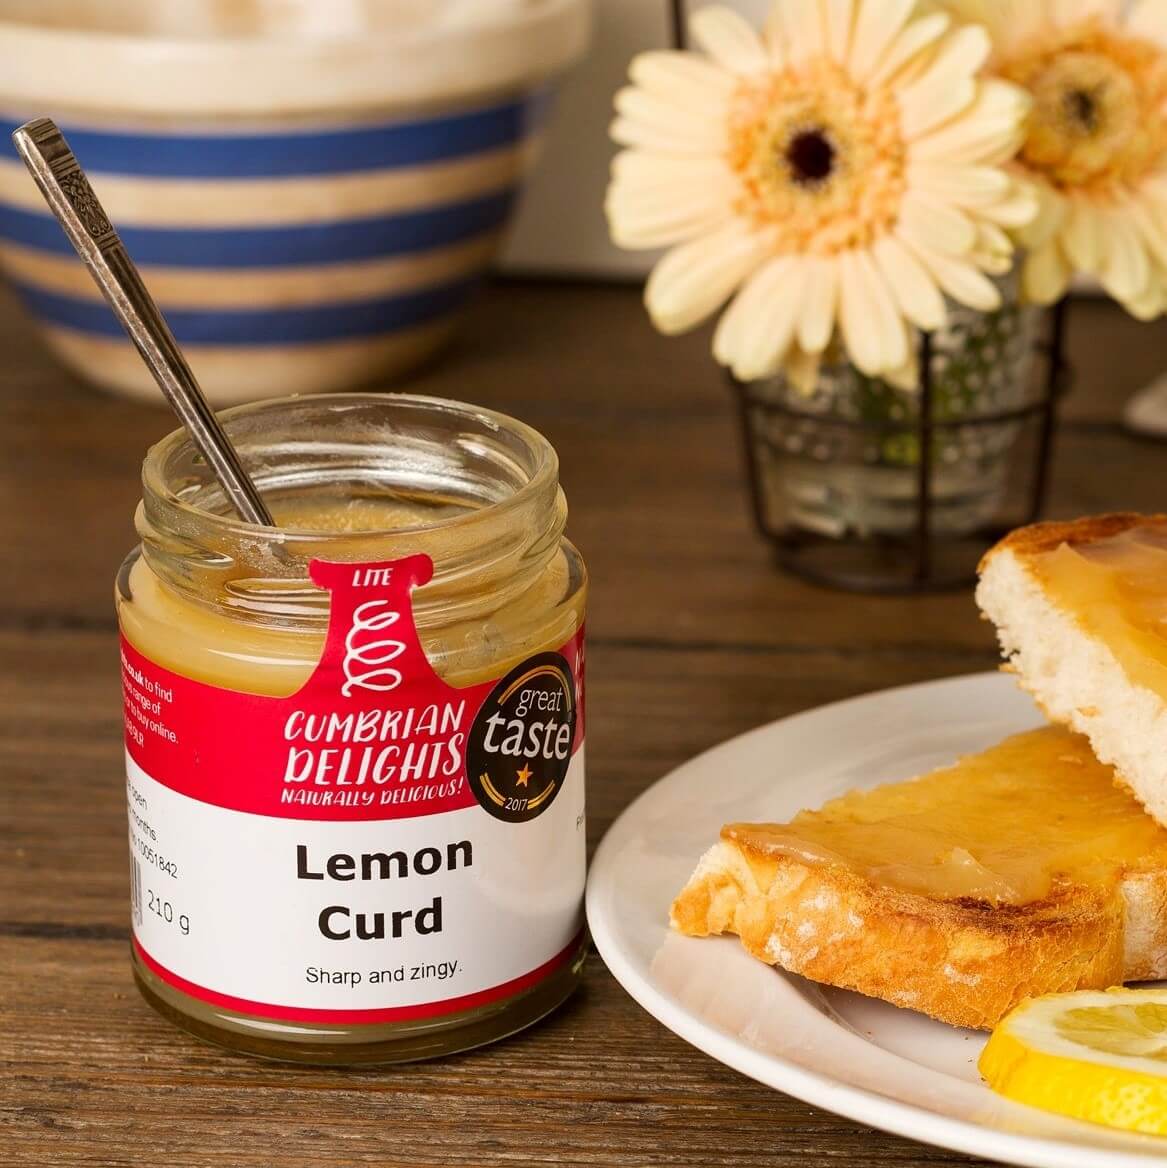 Image of Lemon Curd made in the UK by Cumbrian Delights. Buying this product supports a UK business, jobs and the local community